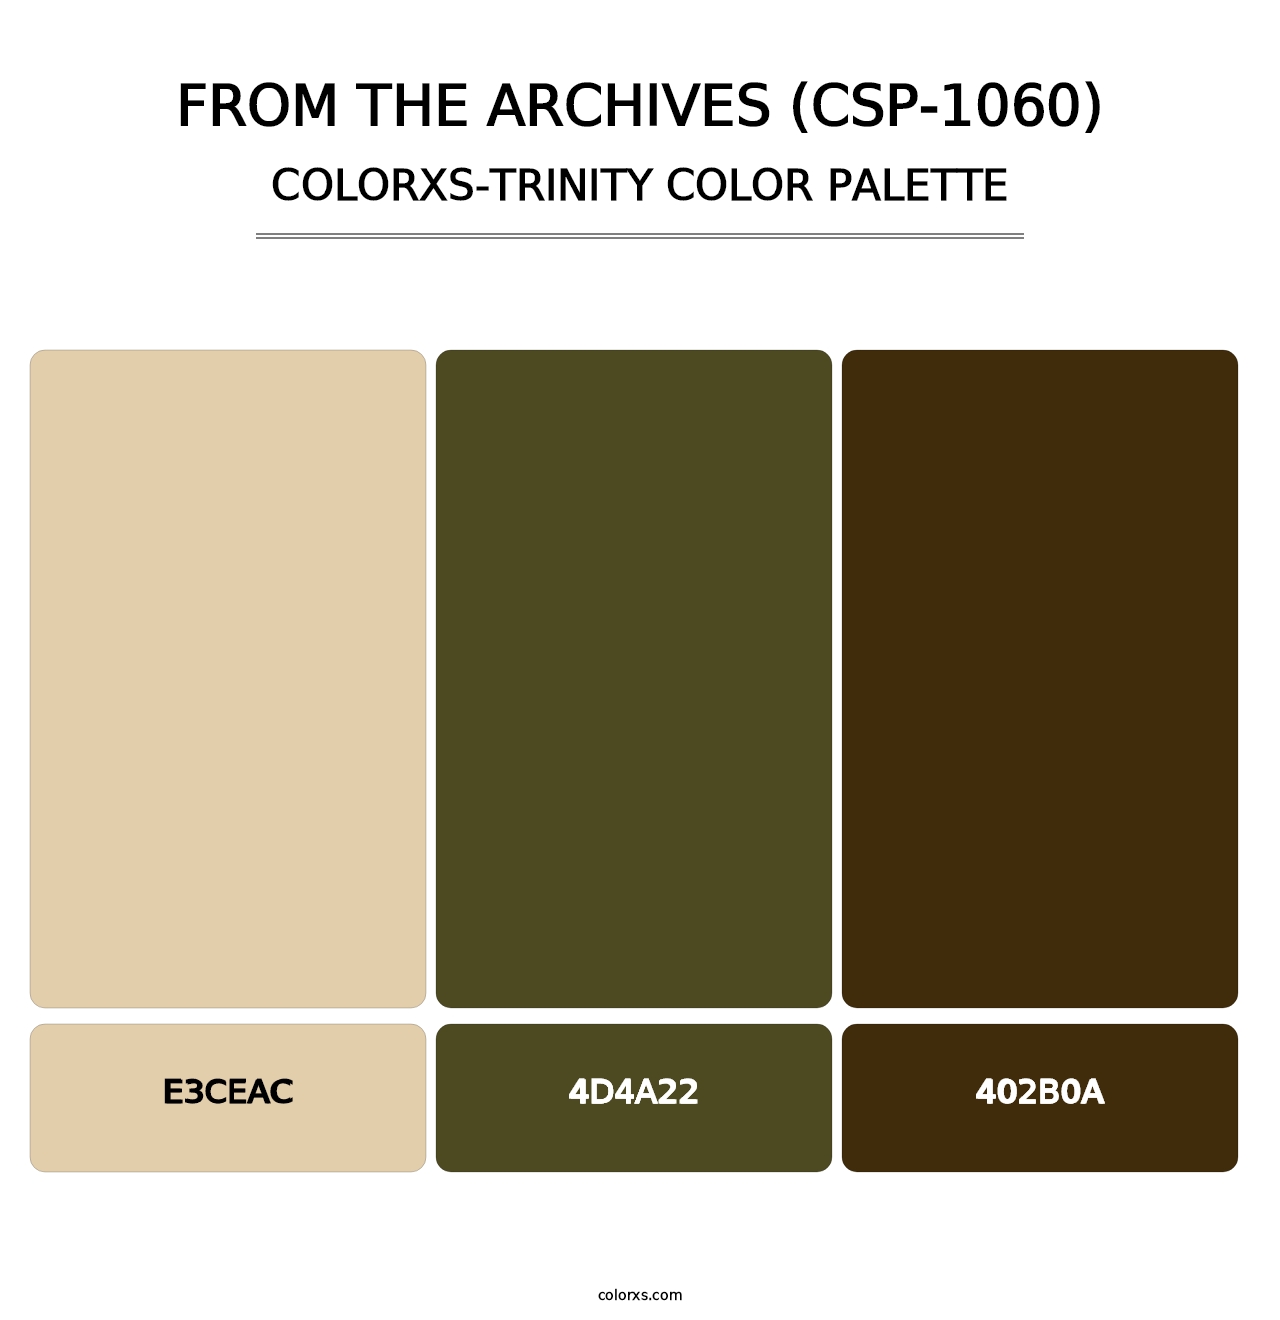 From the Archives (CSP-1060) - Colorxs Trinity Palette